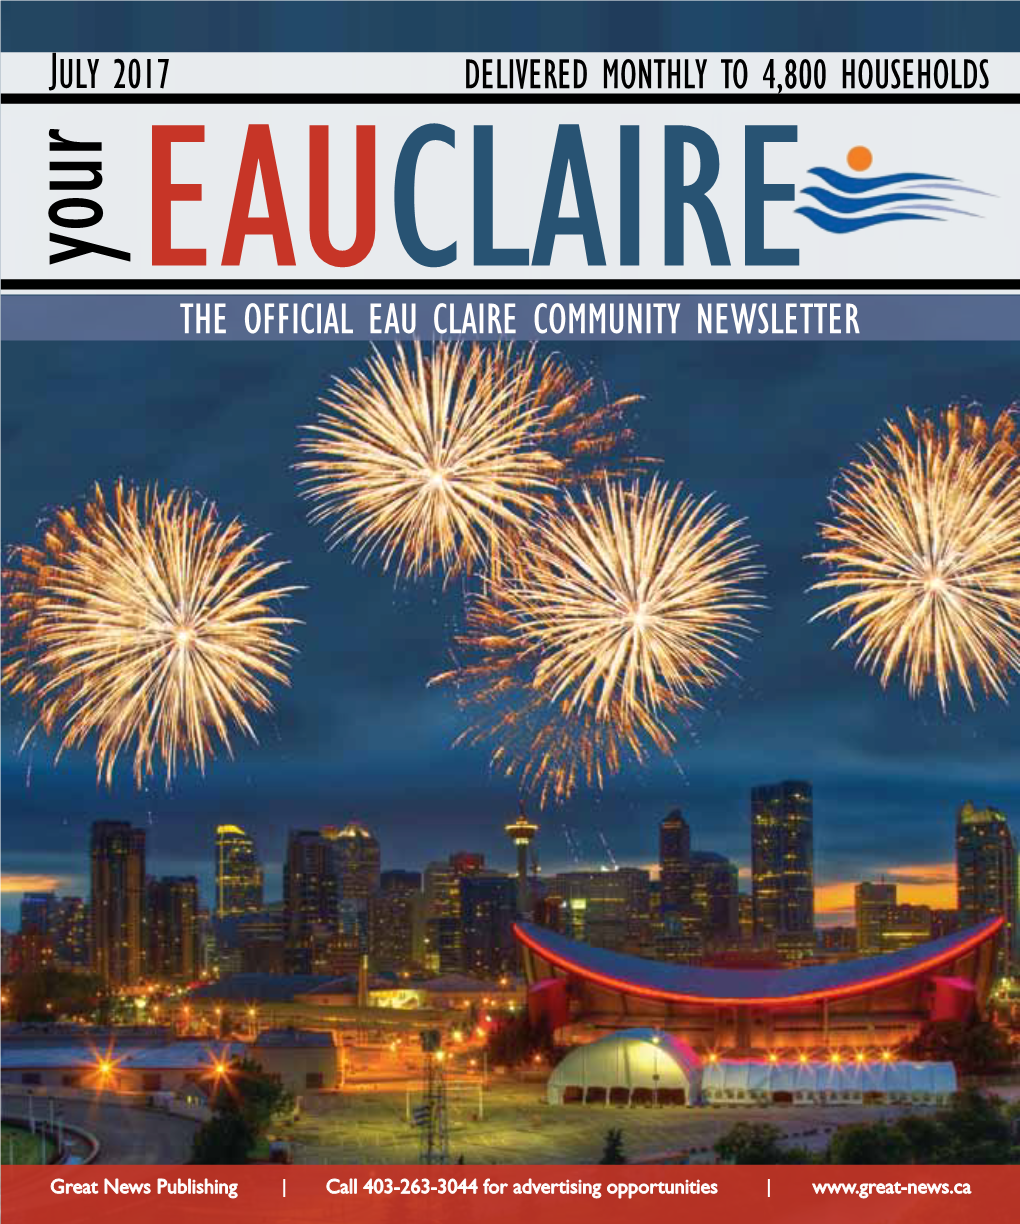 THE OFFICIAL EAU CLAIRE COMMUNITY NEWSLETTER OH, C NADA! Great News Publishing Asked Calgary Residents What They Love About Canada and Being Canadian